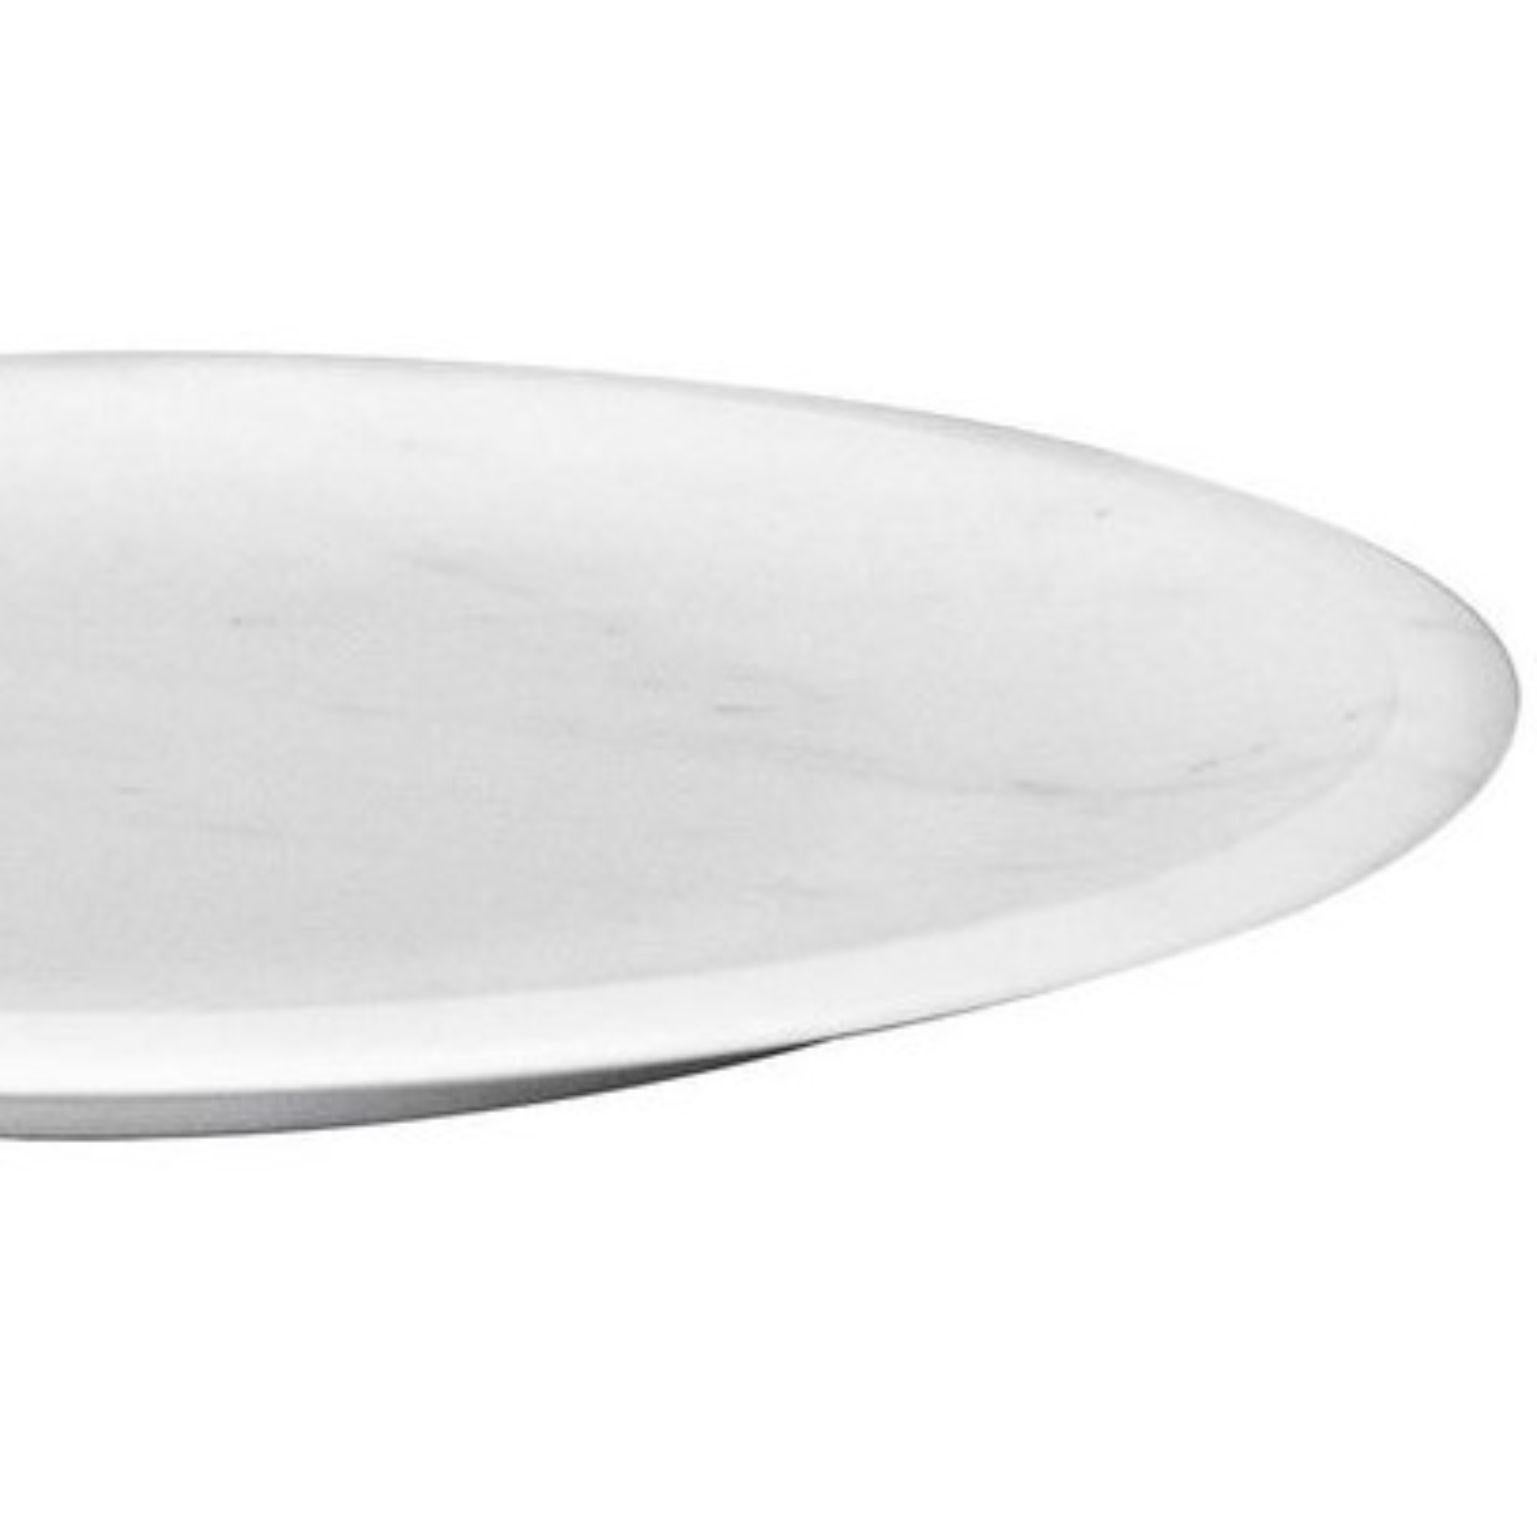 Modern Piatto Piano #1, Dining Plate, White by Ivan Colominas